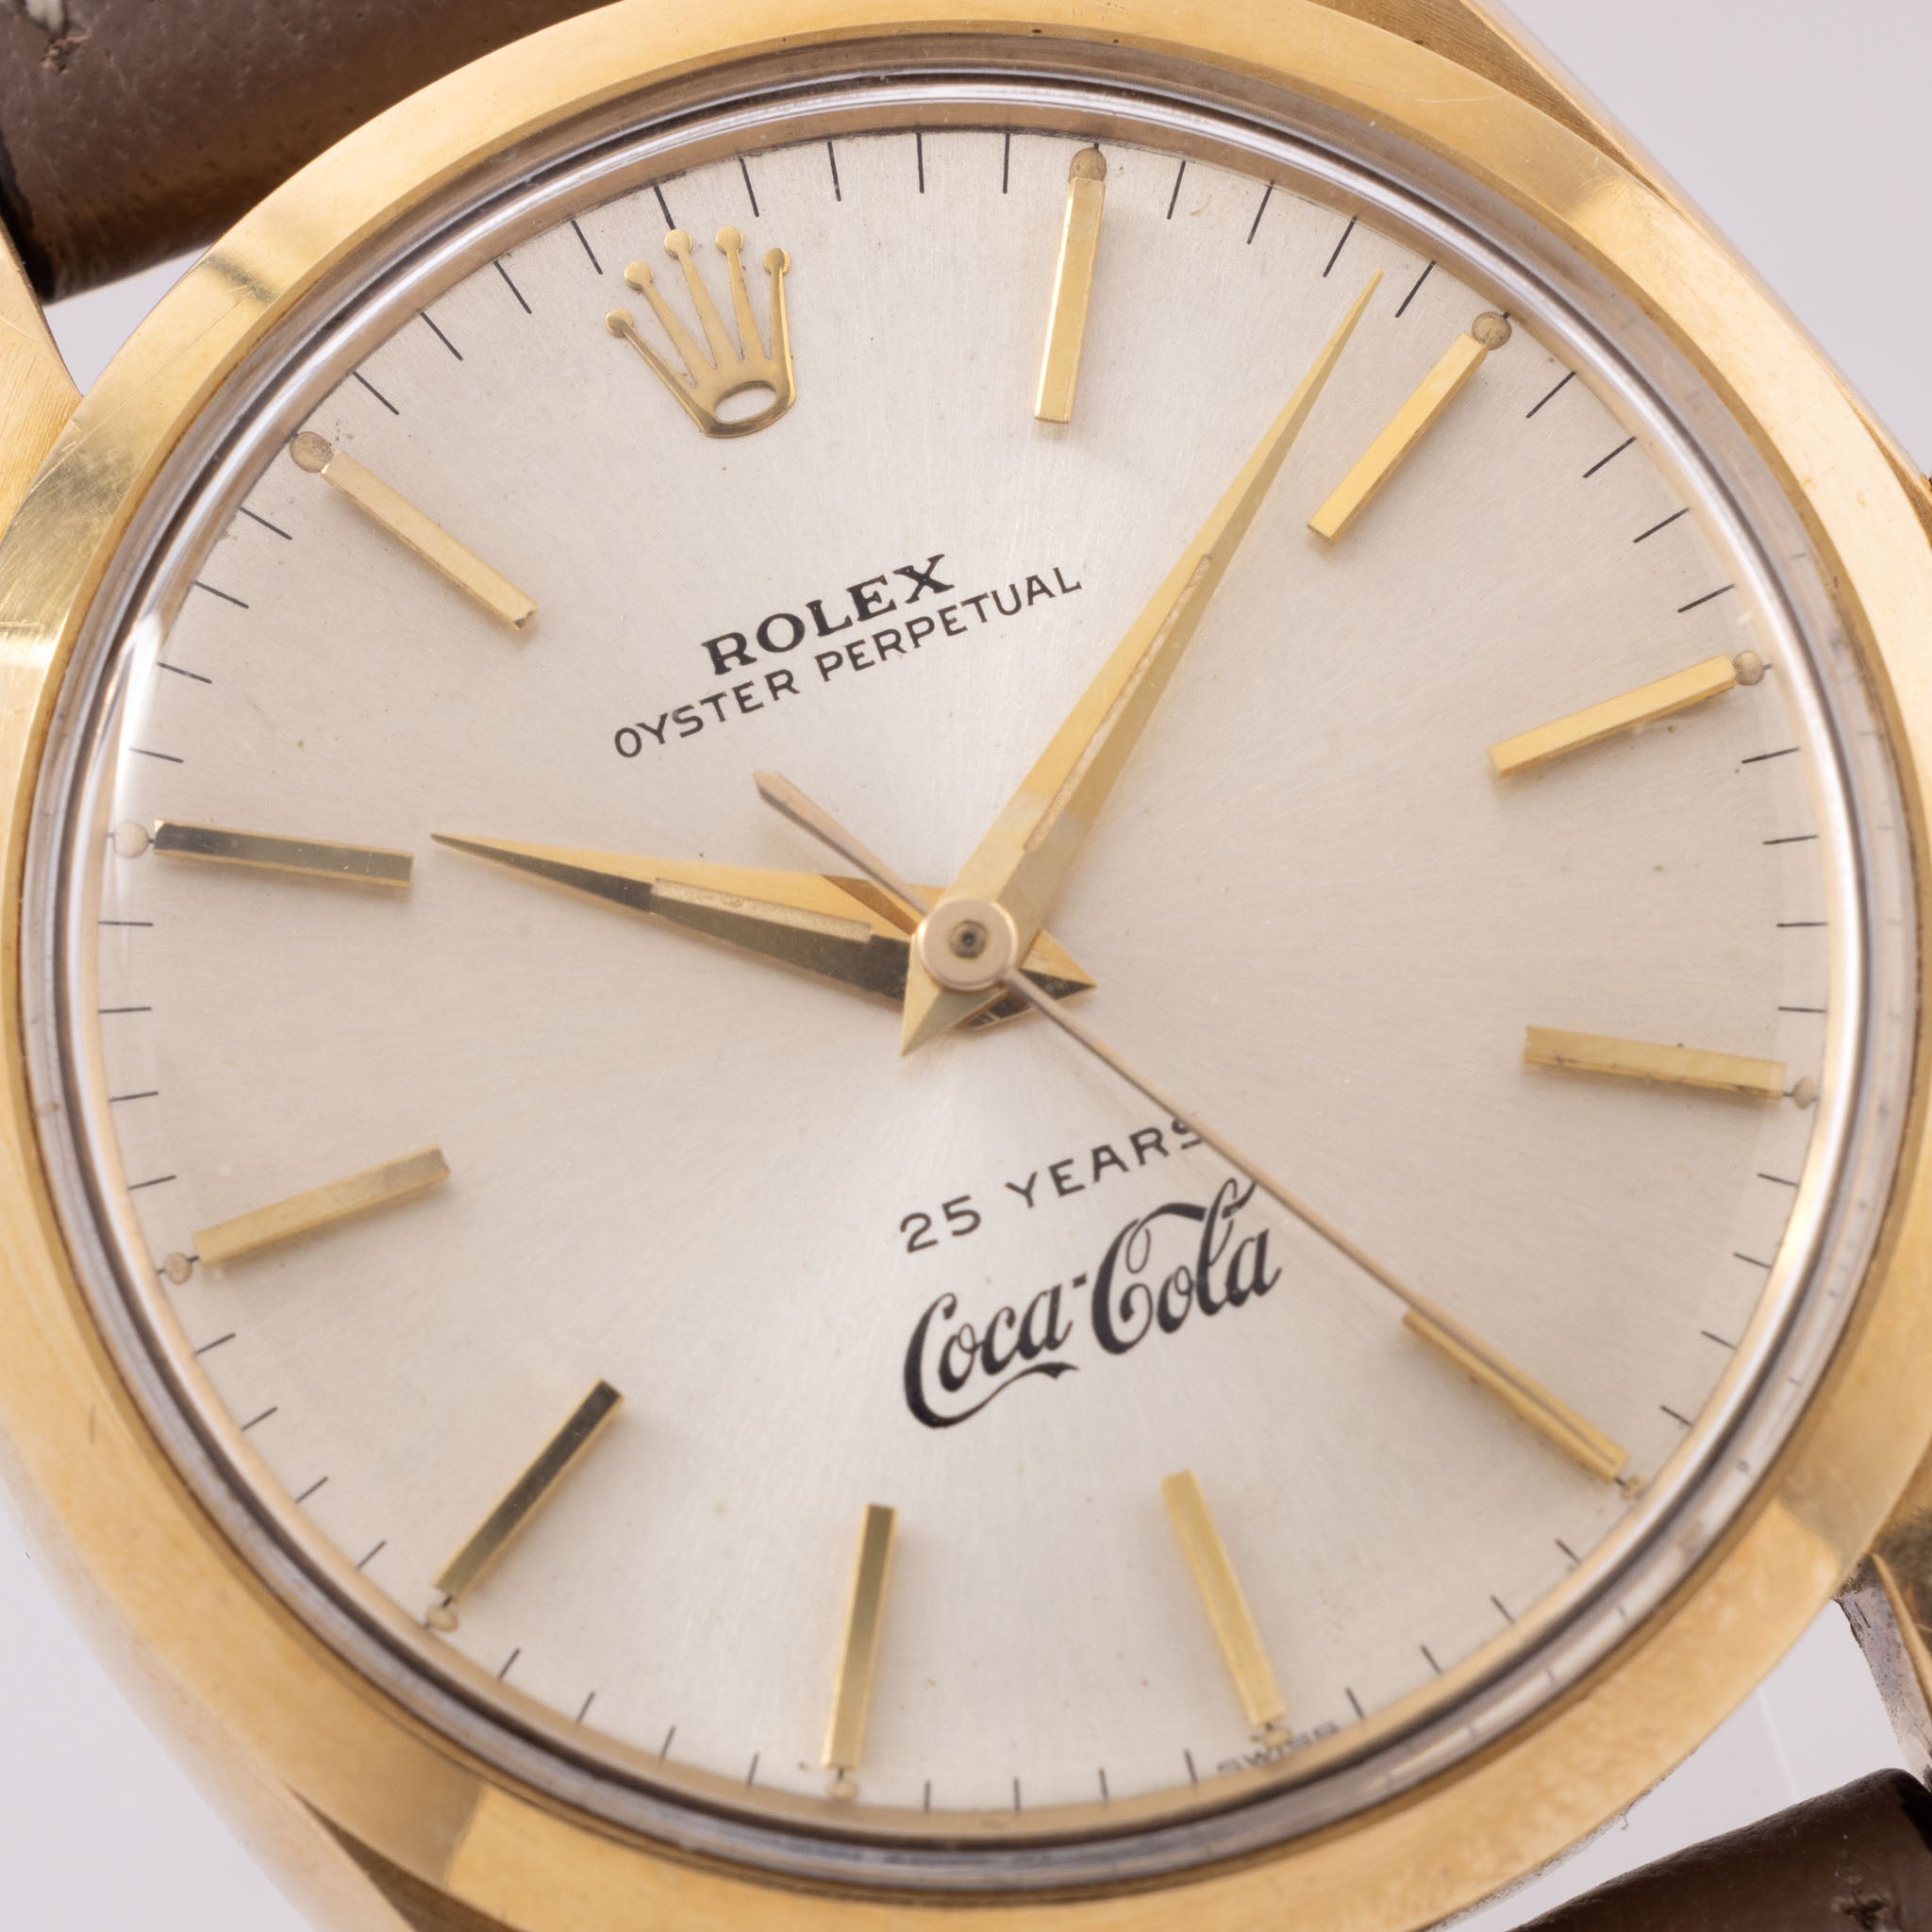 Rolex Oyster Perpetual Ref. 1002 ‘Coca Cola 25 Years’ Dial in 14K Yellow Gold